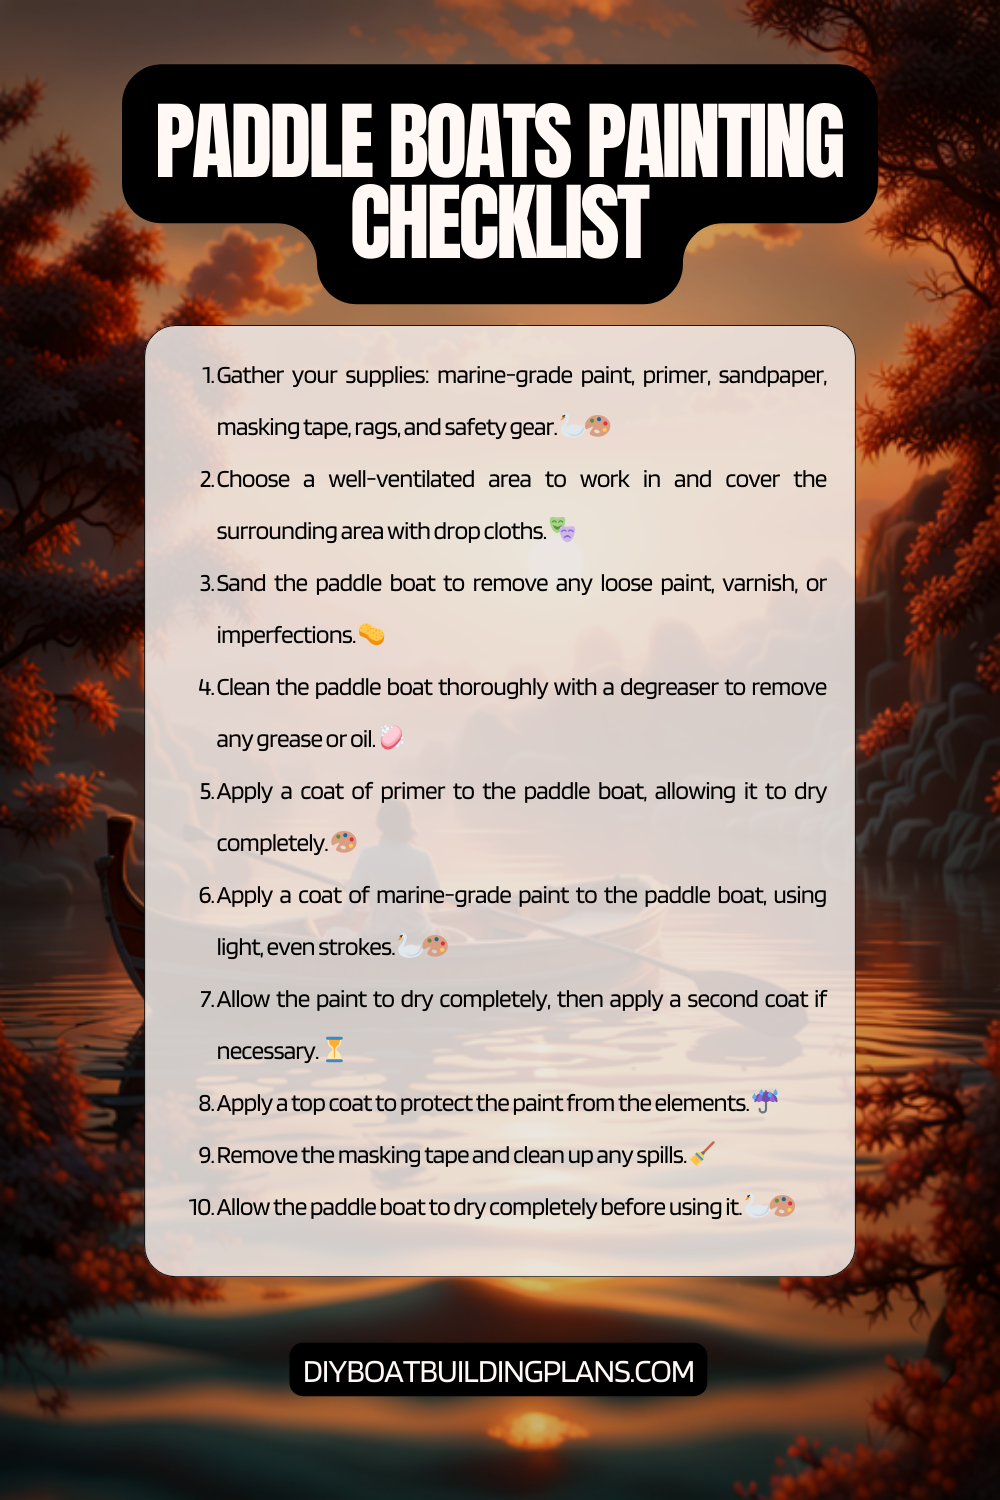 Paddle Boat Painting Checklist